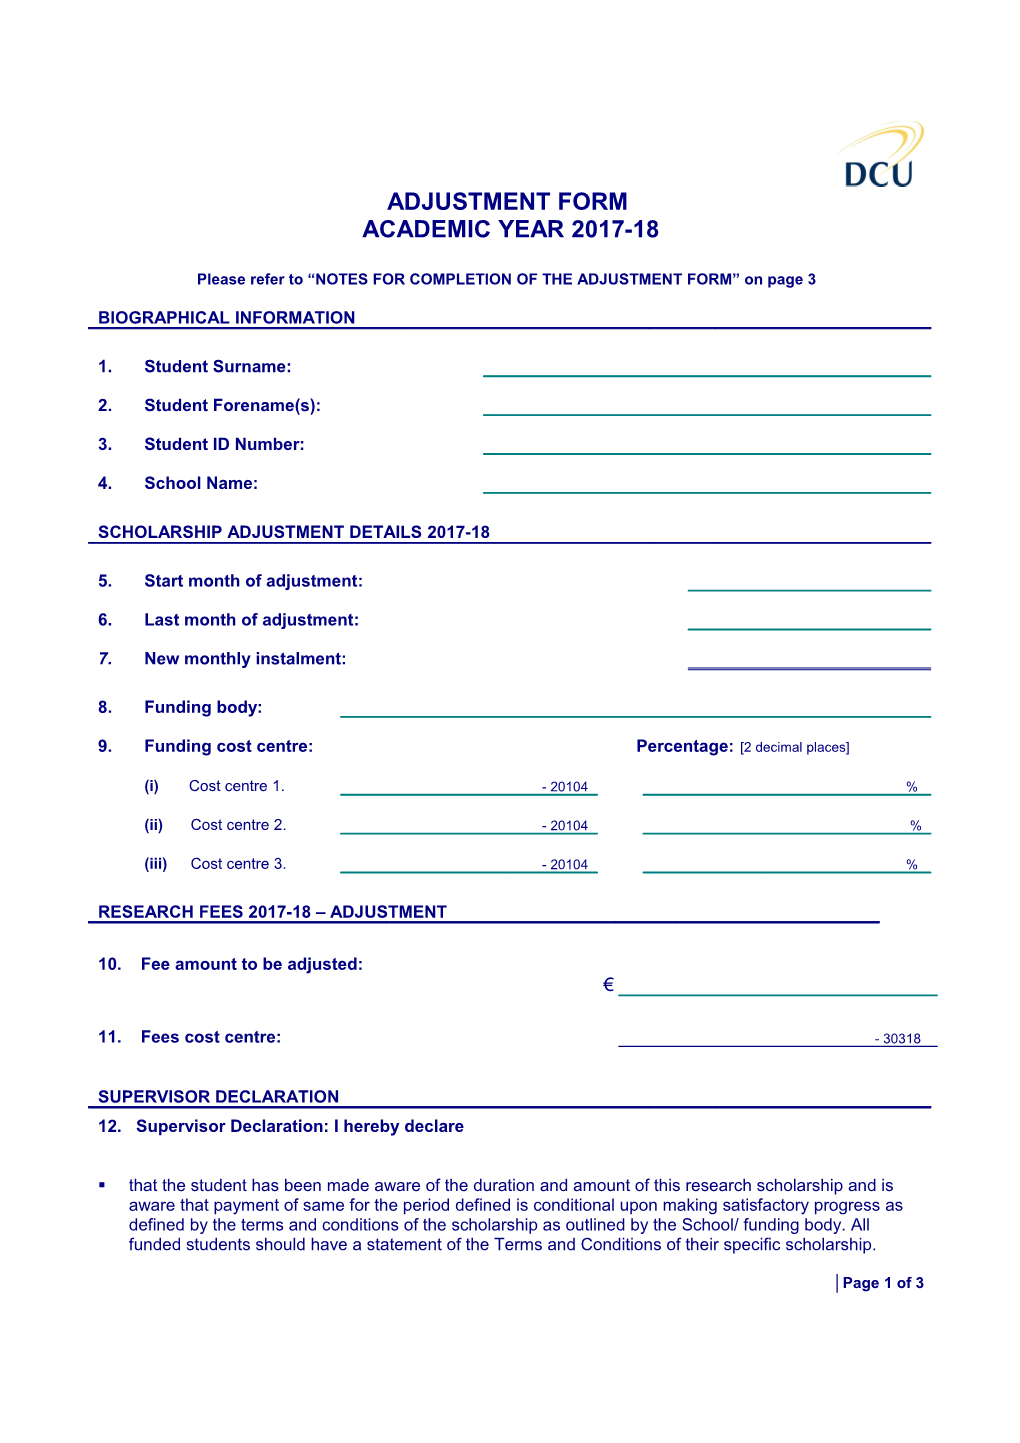 Please Refer to NOTES for COMPLETION of the ADJUSTMENT FORM on Page 3